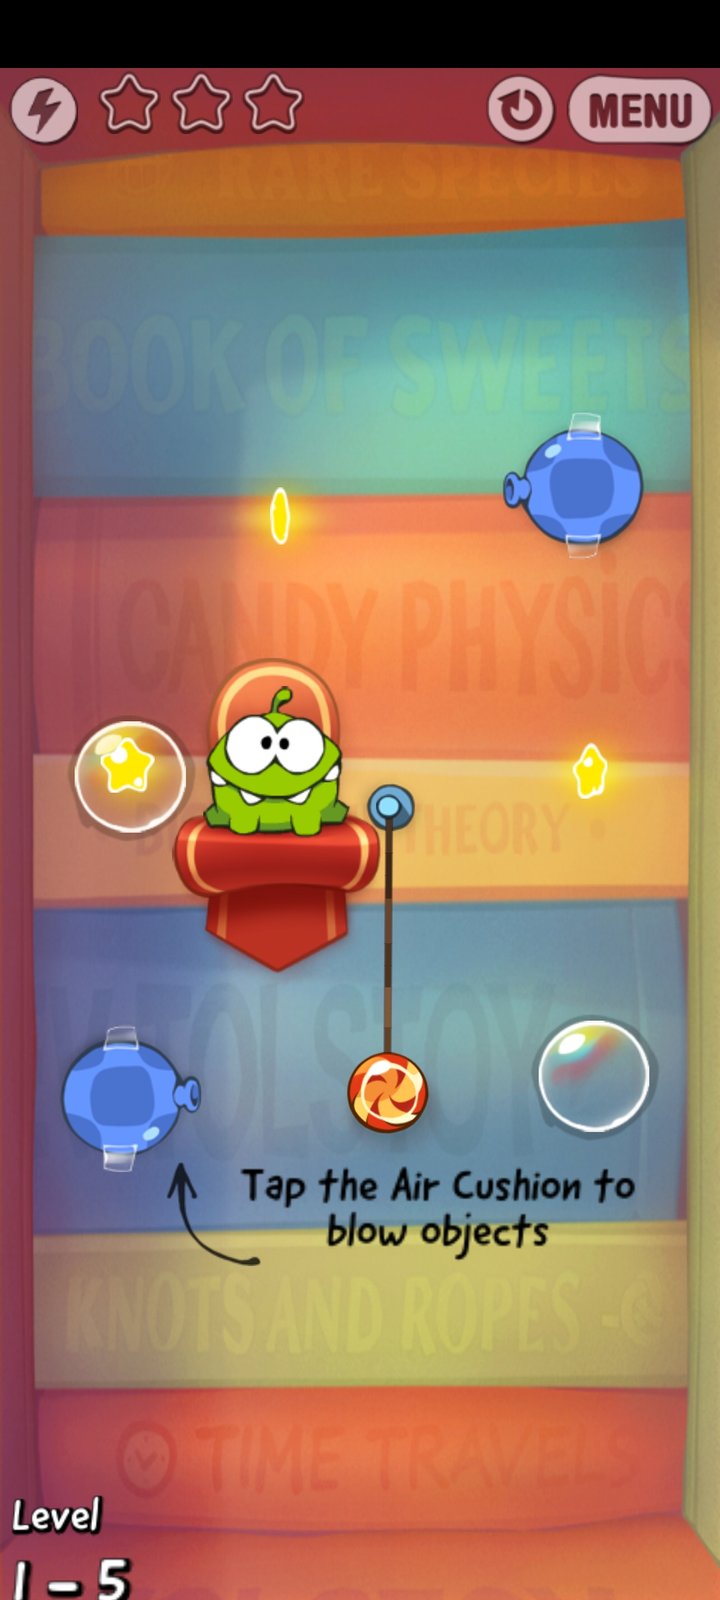 Cut the Rope: Experiments GOLD Mod APK v1.14.0 (Paid for free